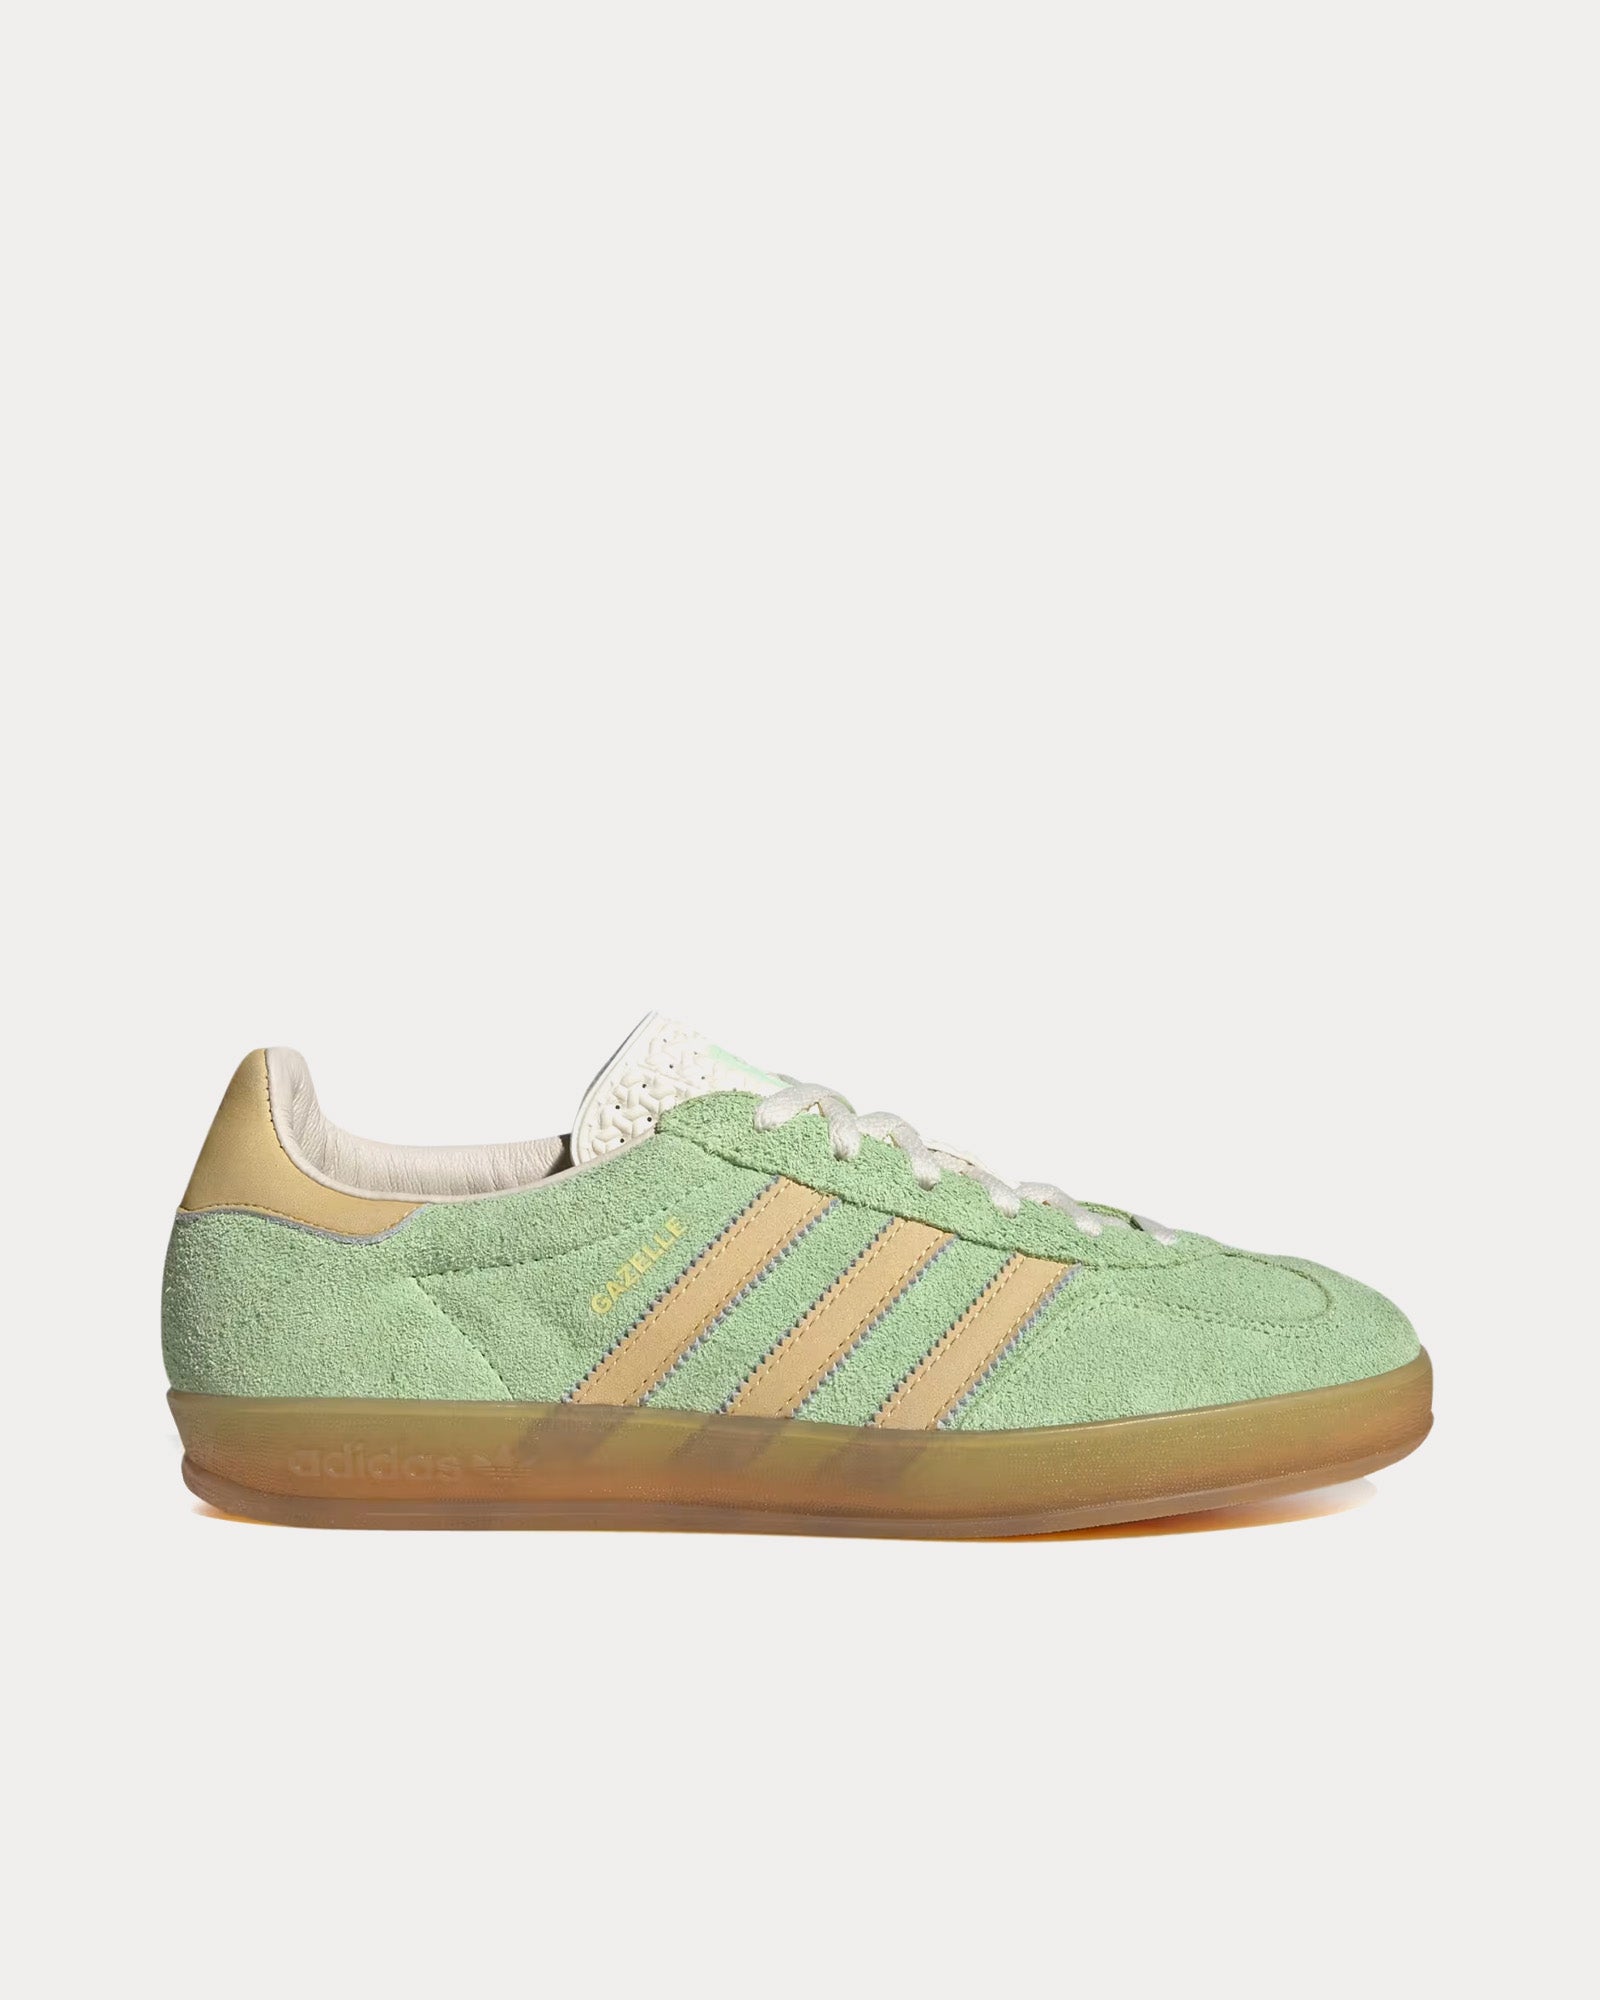 Adidas - Gazelle Indoor Semi Green Spark / Almost Yellow / Cream White Low Top Sneakers